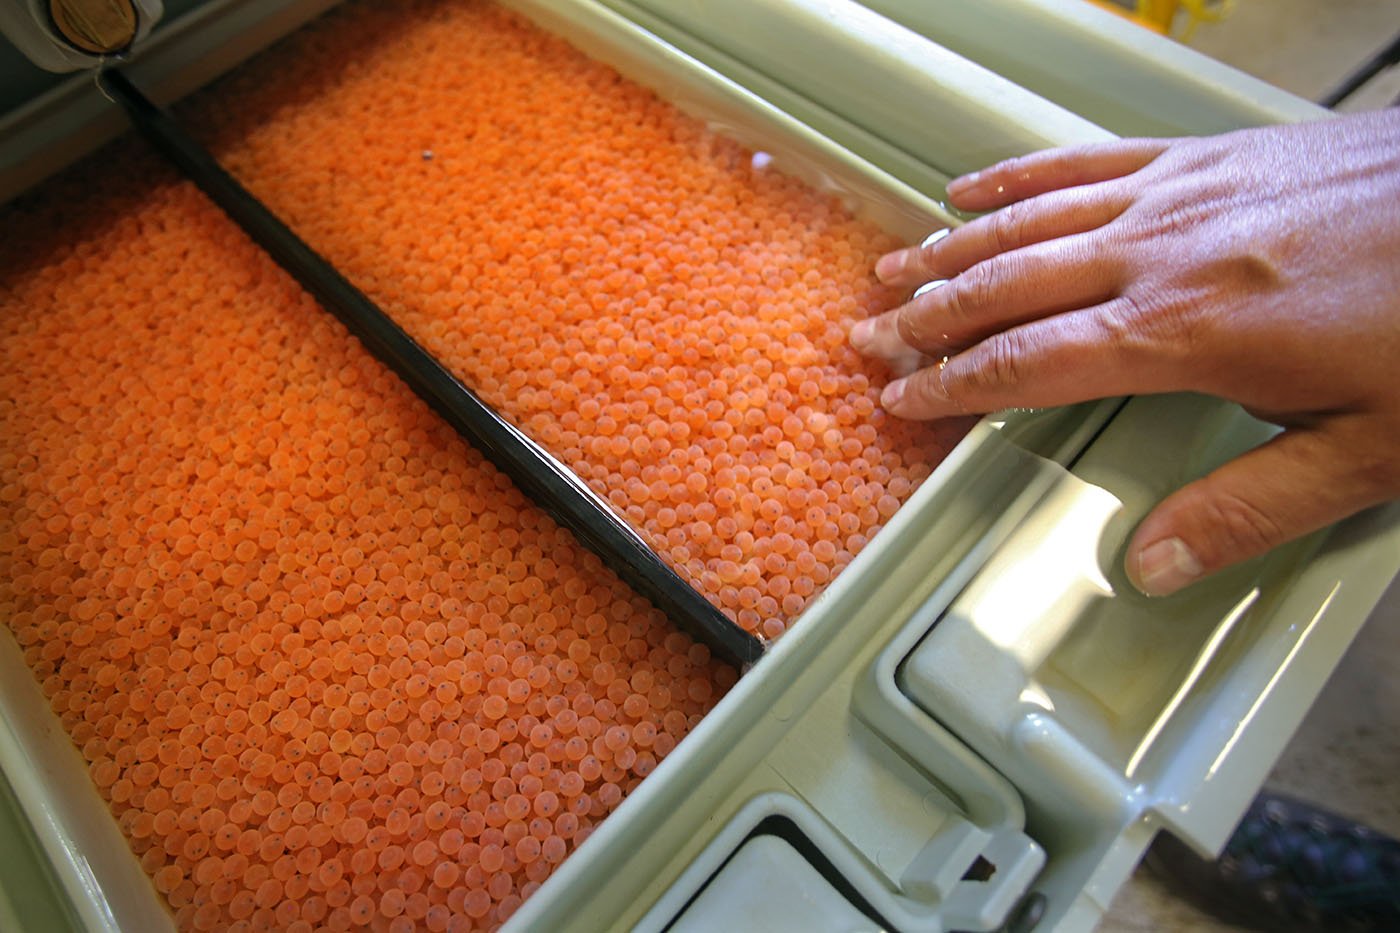  Livingston Stone National Fish Hatchery — A tray of fertilized winter-run eggs that are developing in water pumped in from Shasta Reservoir. June 10, 2022. Tom Levy/The Spiritual Edge 